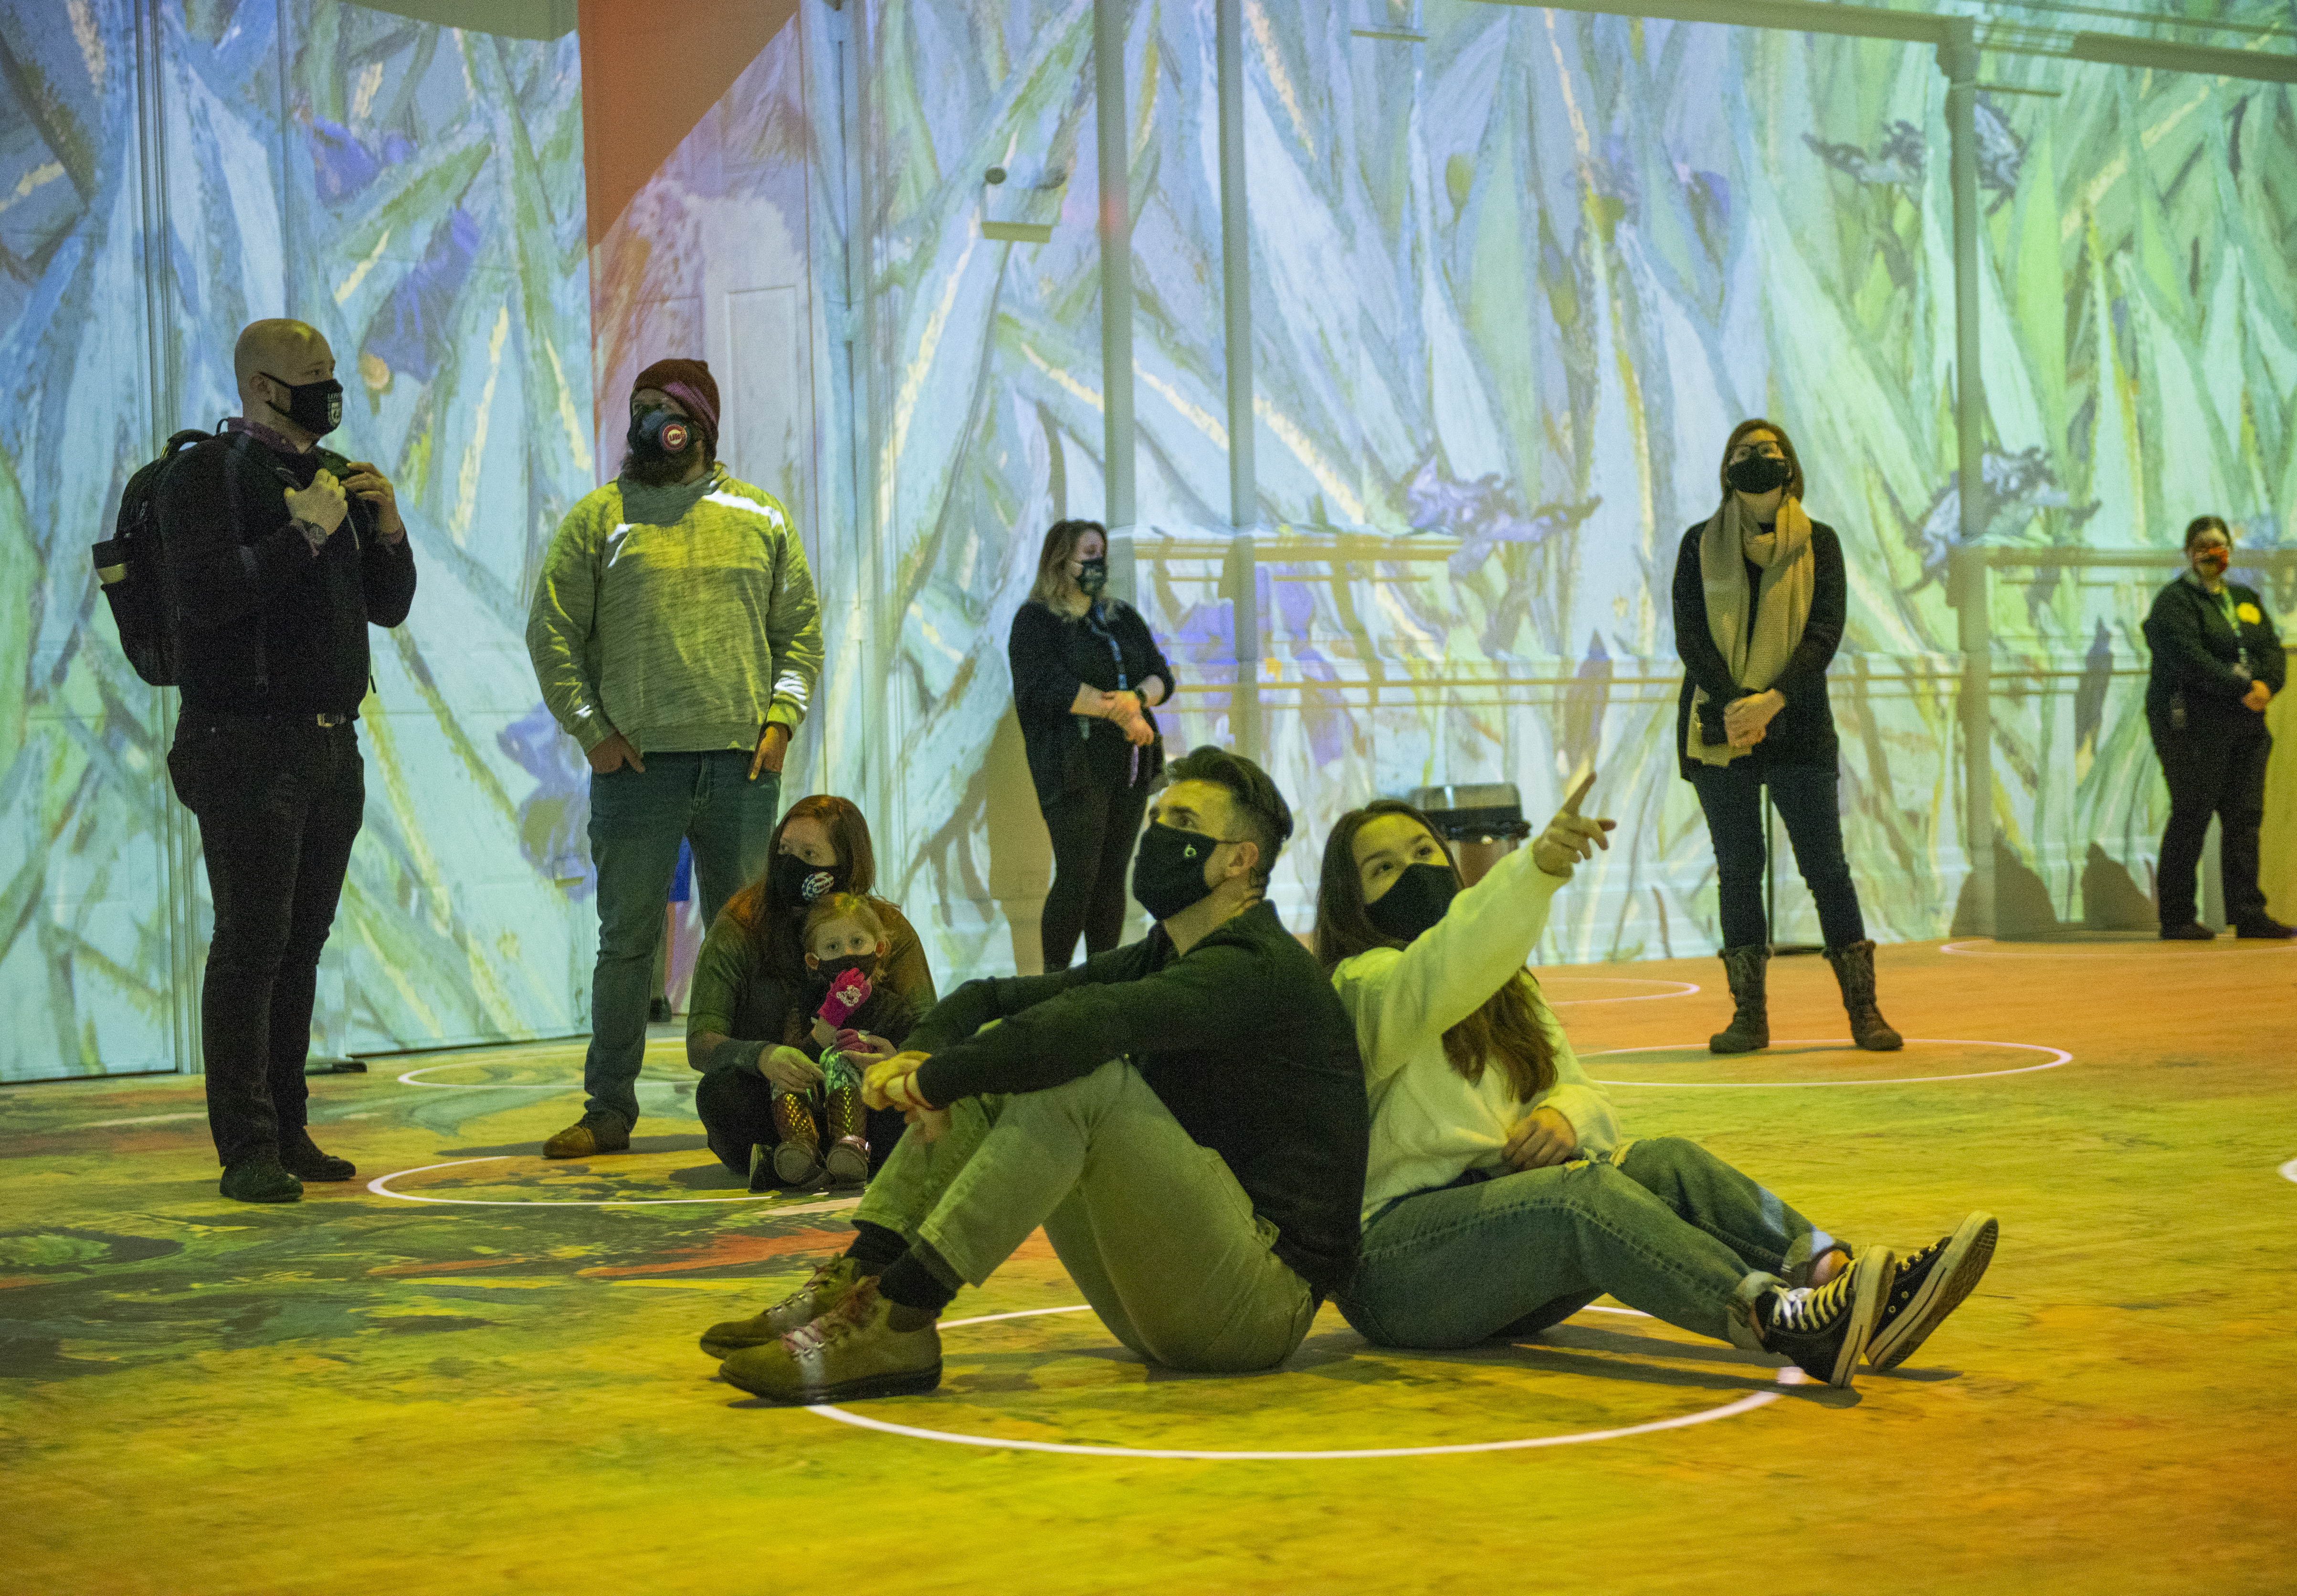 CHARLOTTE LEDGER – Inside Their Pandemic Year: Behind the Curtain at Blumenthal Performing Arts